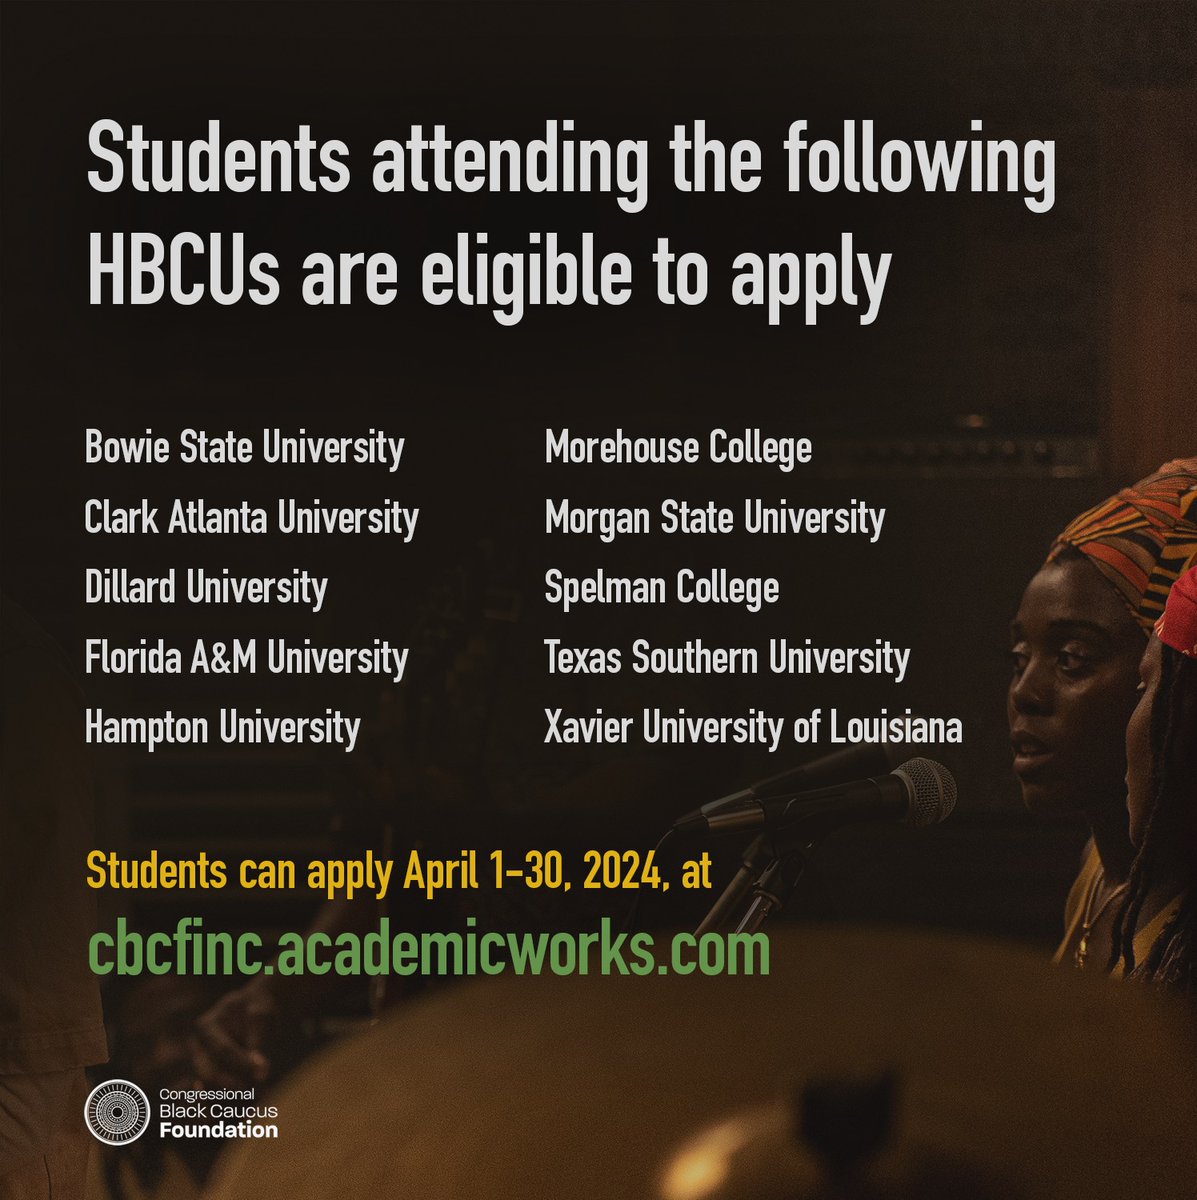 #OneLoveGivesForward, the impact continues! ☝🏾❤️🇺🇸 in partnership with the Congressional Black Caucus Foundation, ‘#BobMarley: @OneLoveMovie’ is now offering 10 scholarships to current undergraduate students at HBCUs pursuing social justice-related degrees. Applications are open